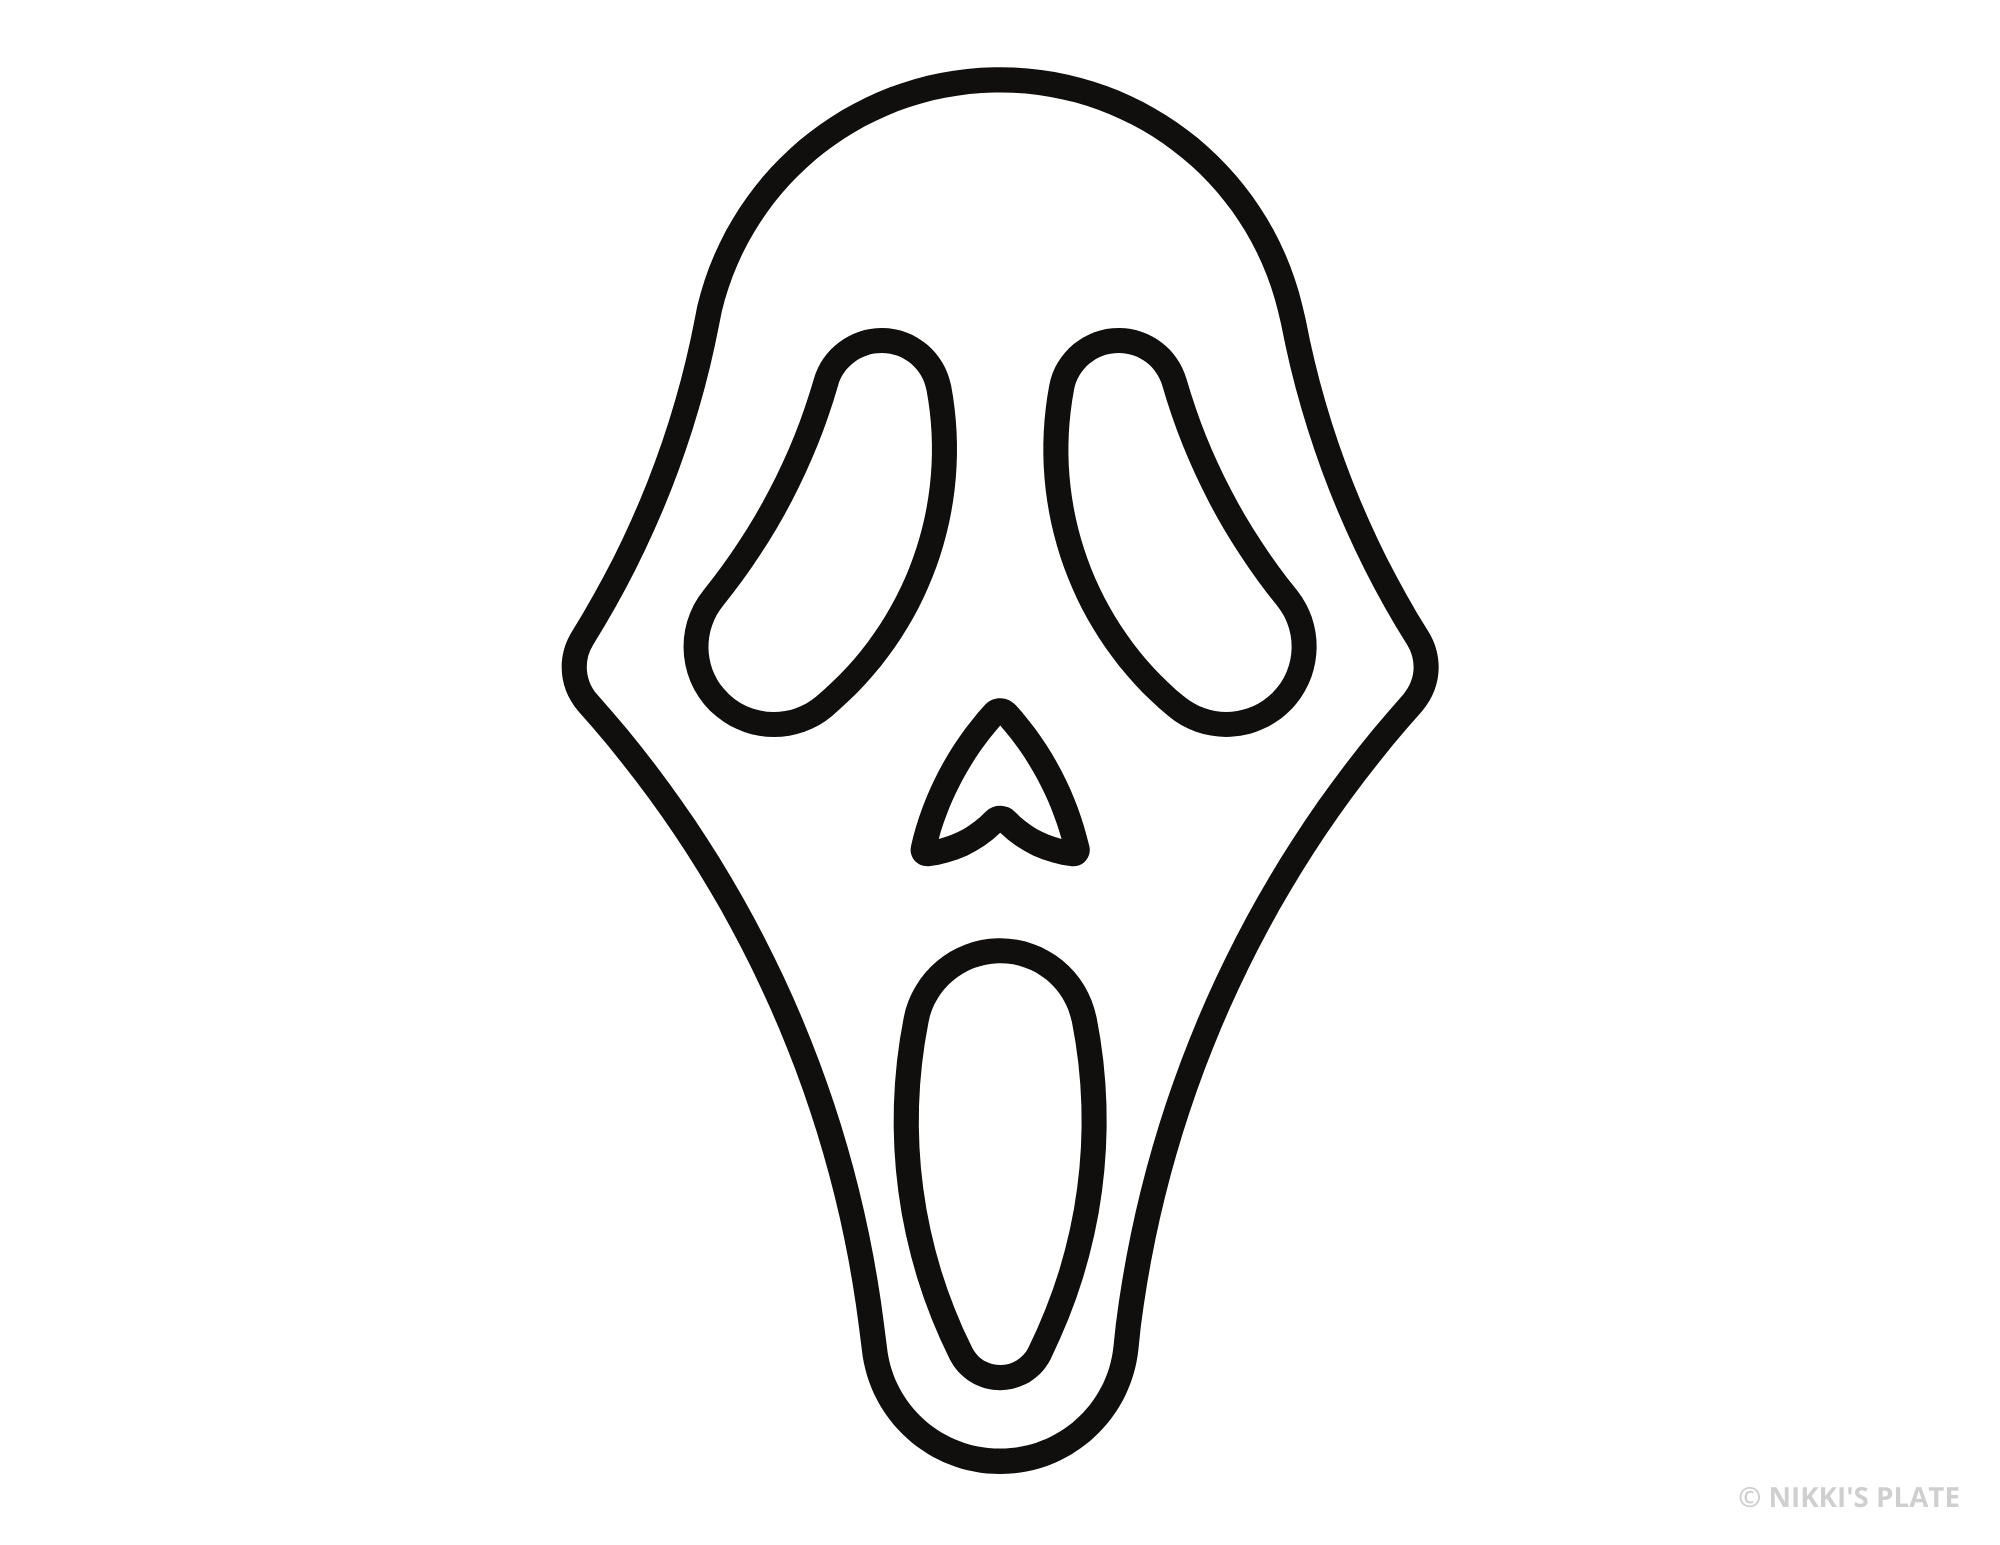 Scream Pumpkin Carving Stencil (FREE PRINTABLE); pumpkin carving scream face that you can print, trace and cut out on your pumpkin for Halloween! 